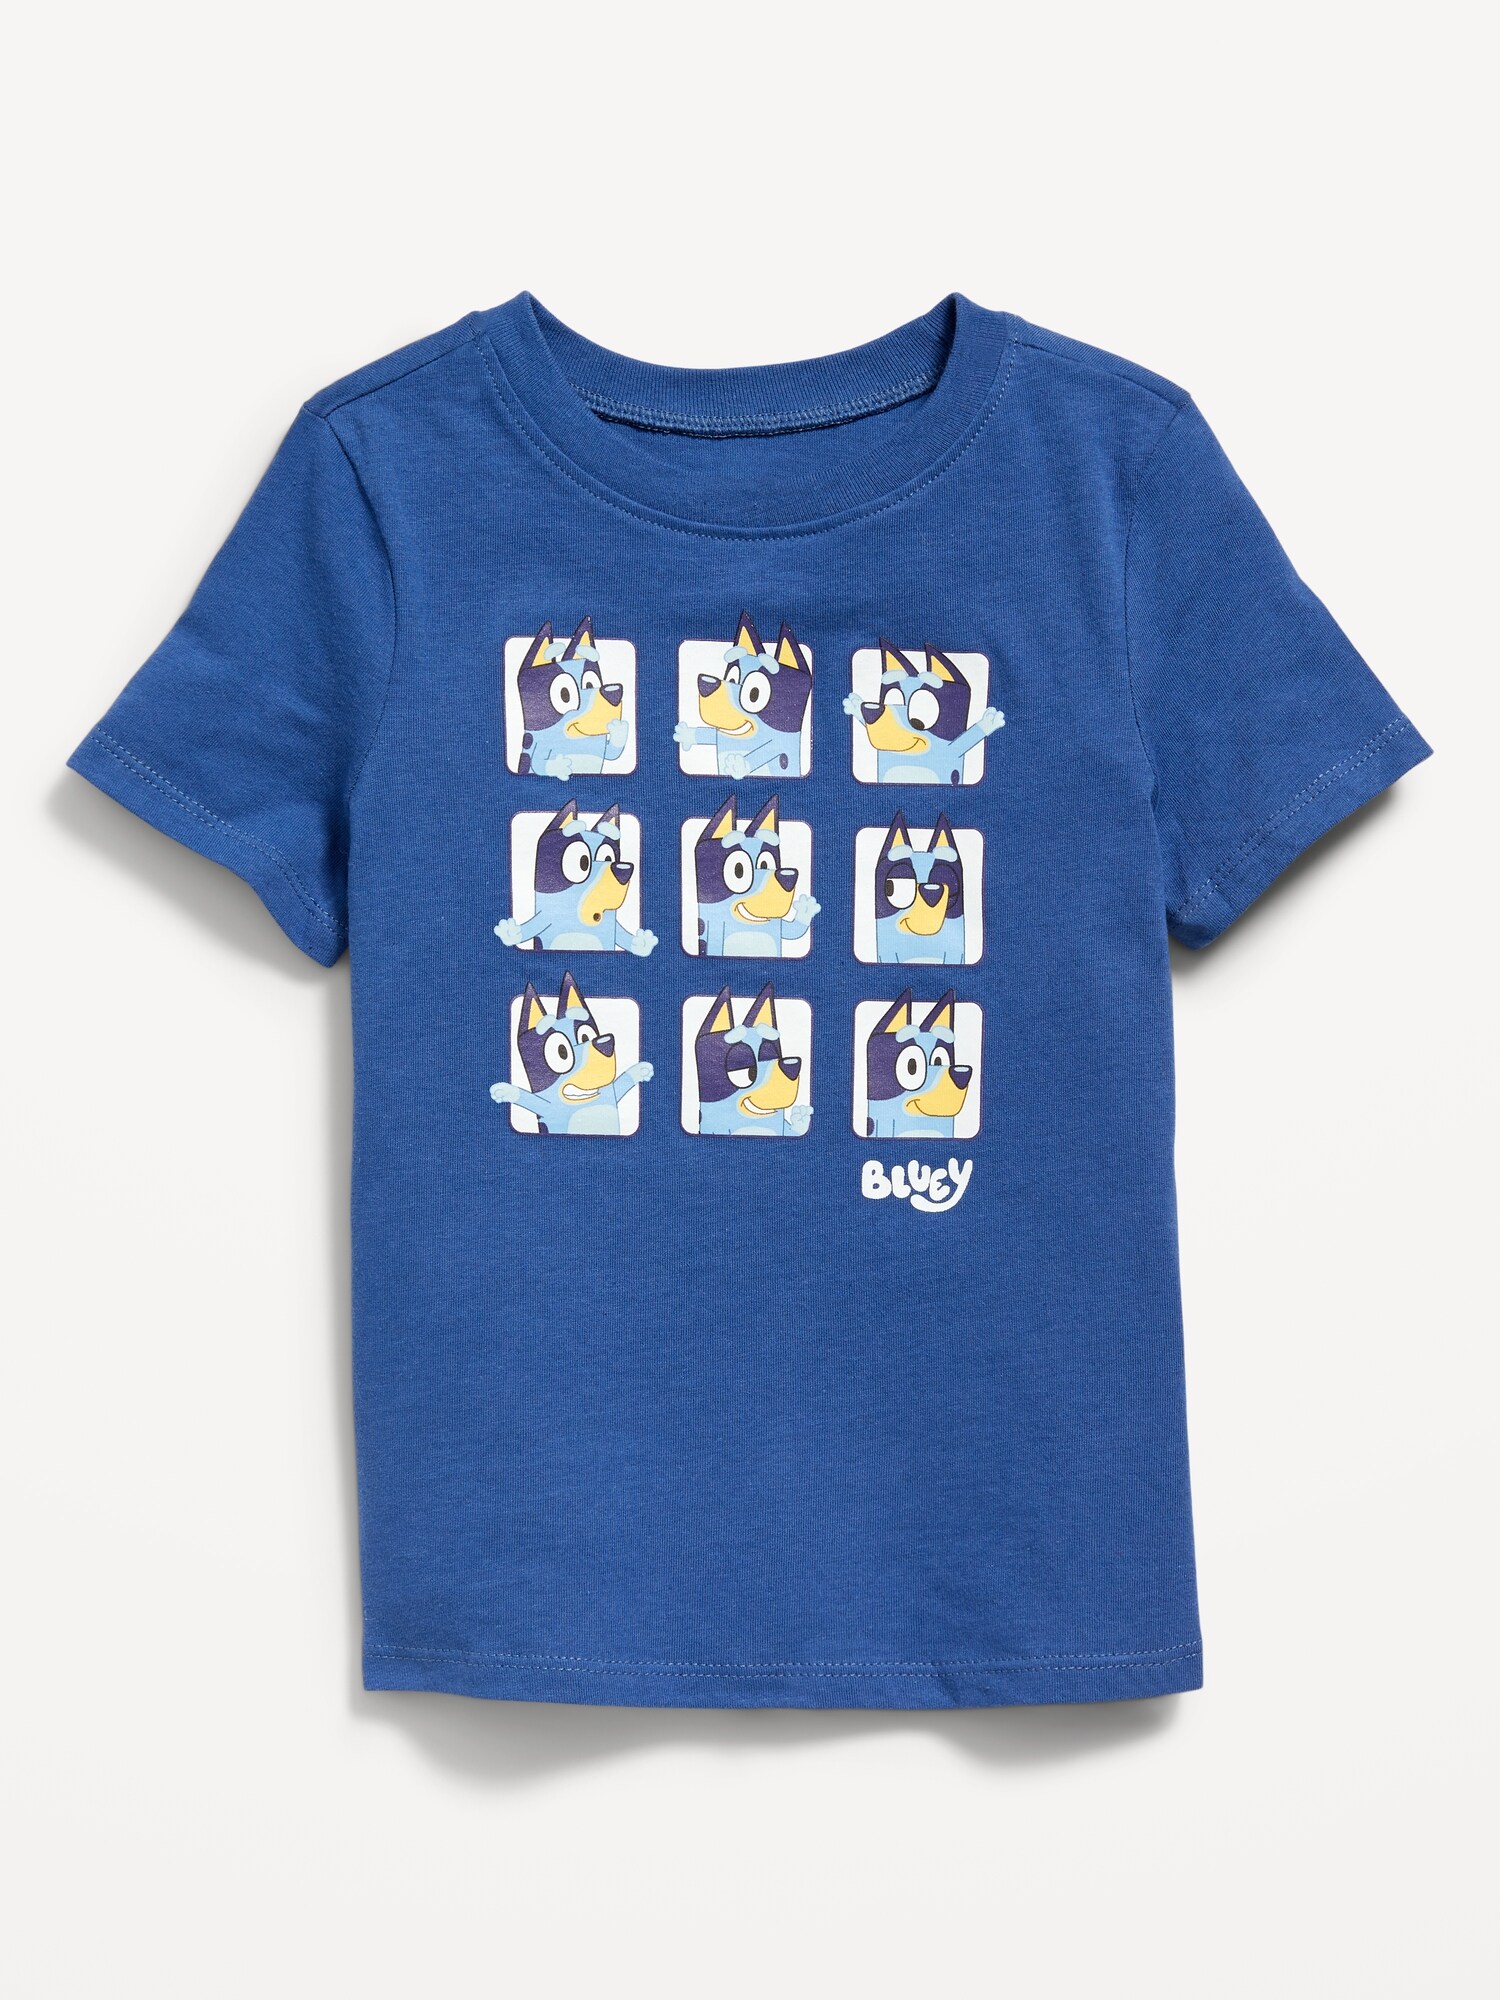 Unisex Bluey™ Graphic T-Shirt for Toddler | Old Navy